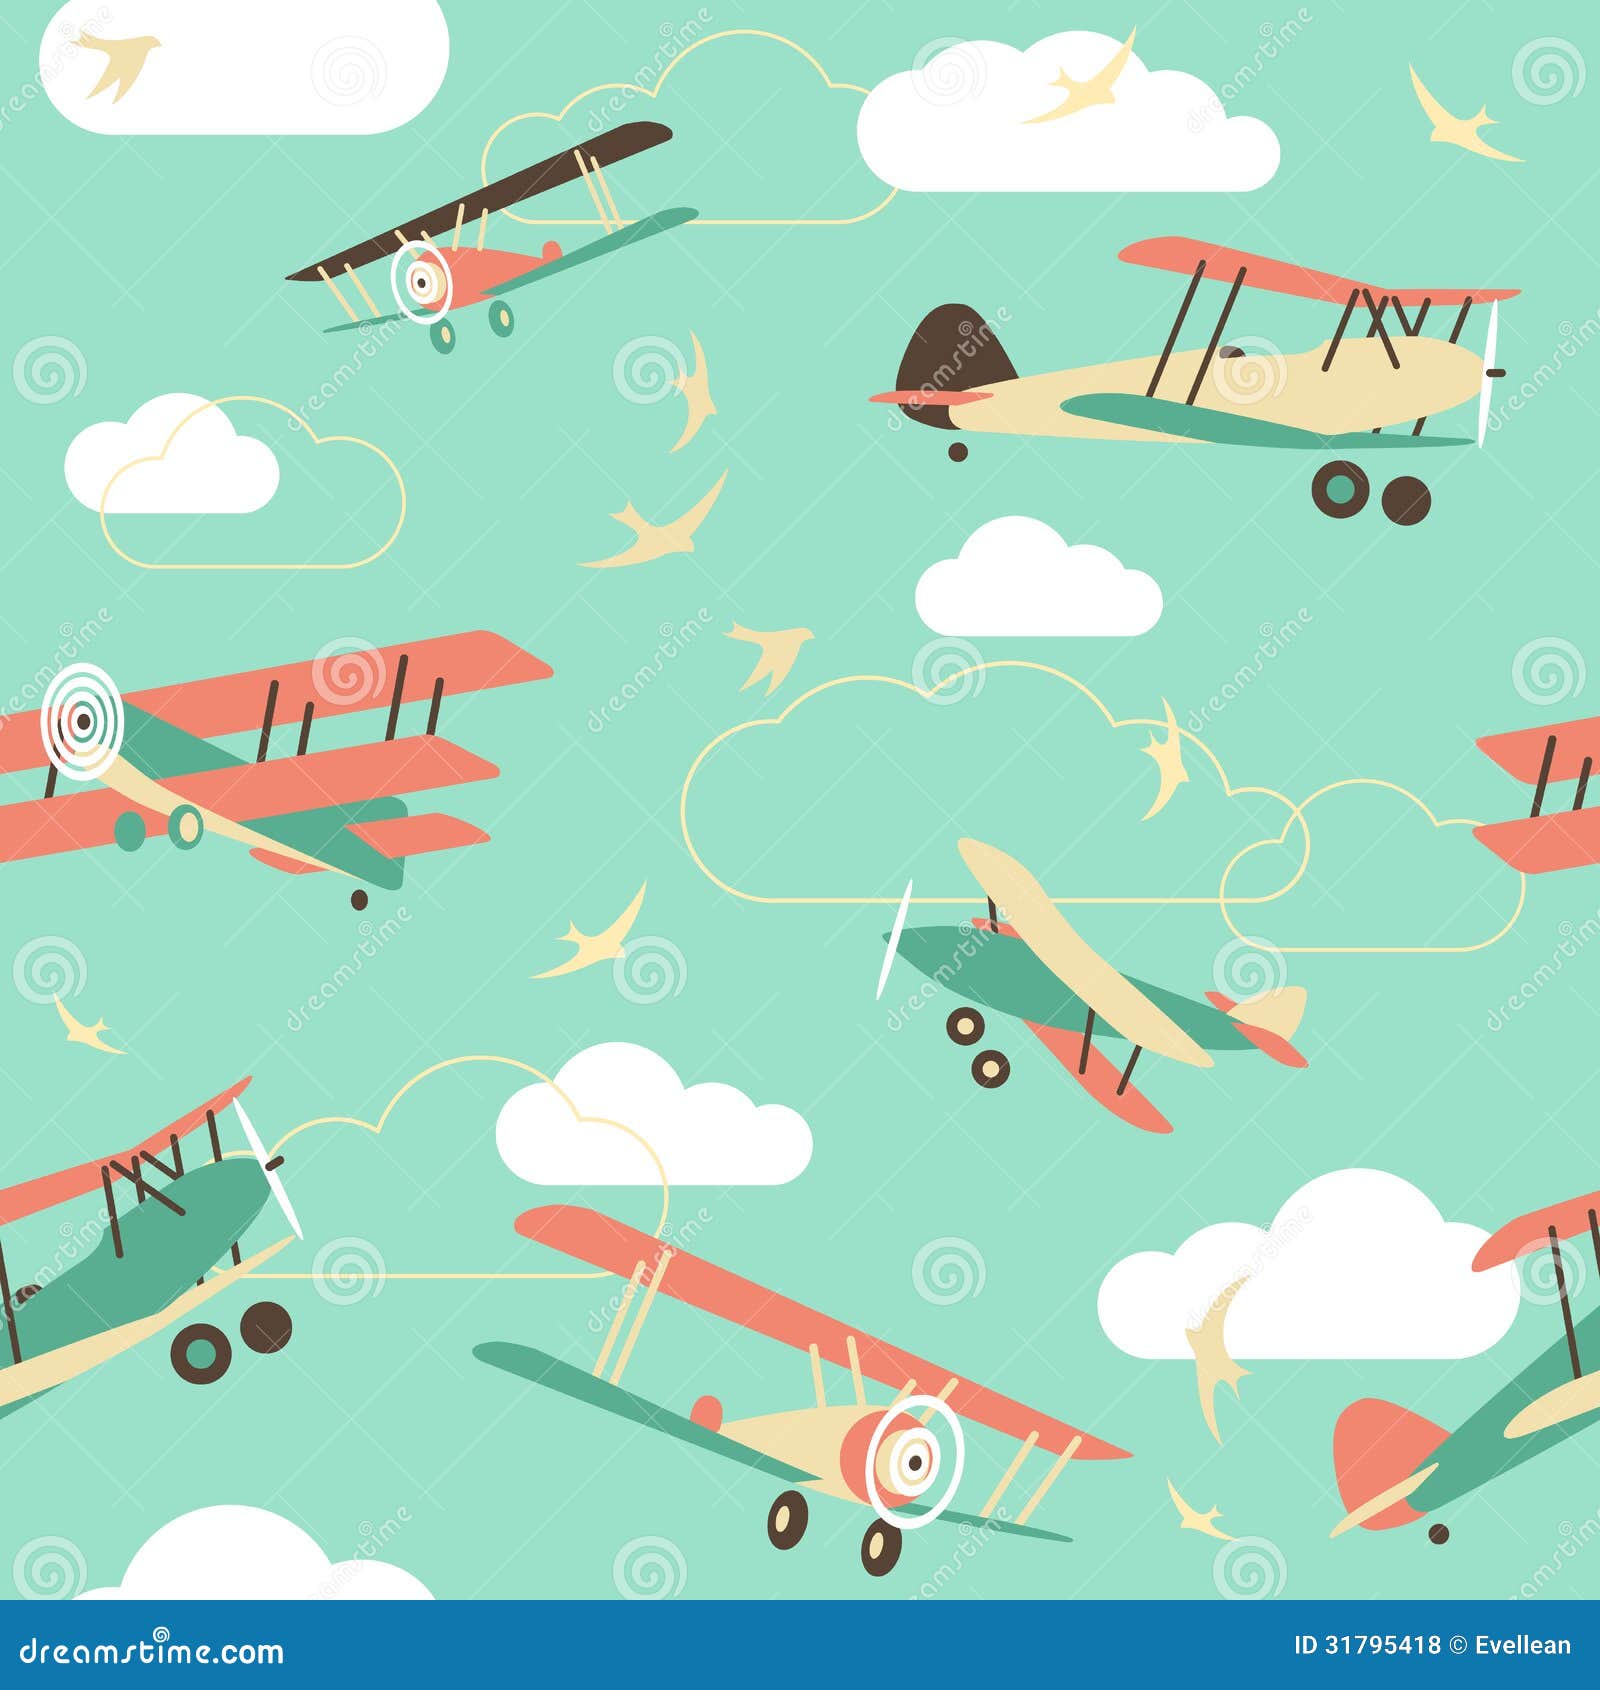 7x10 FT Vintage Airplane Vinyl Photography Backdrop,Old Fashioned Plane Engine Ancient Flight Illustration Print Background for Baby Birthday Party Wedding Graduation Home Decoration 